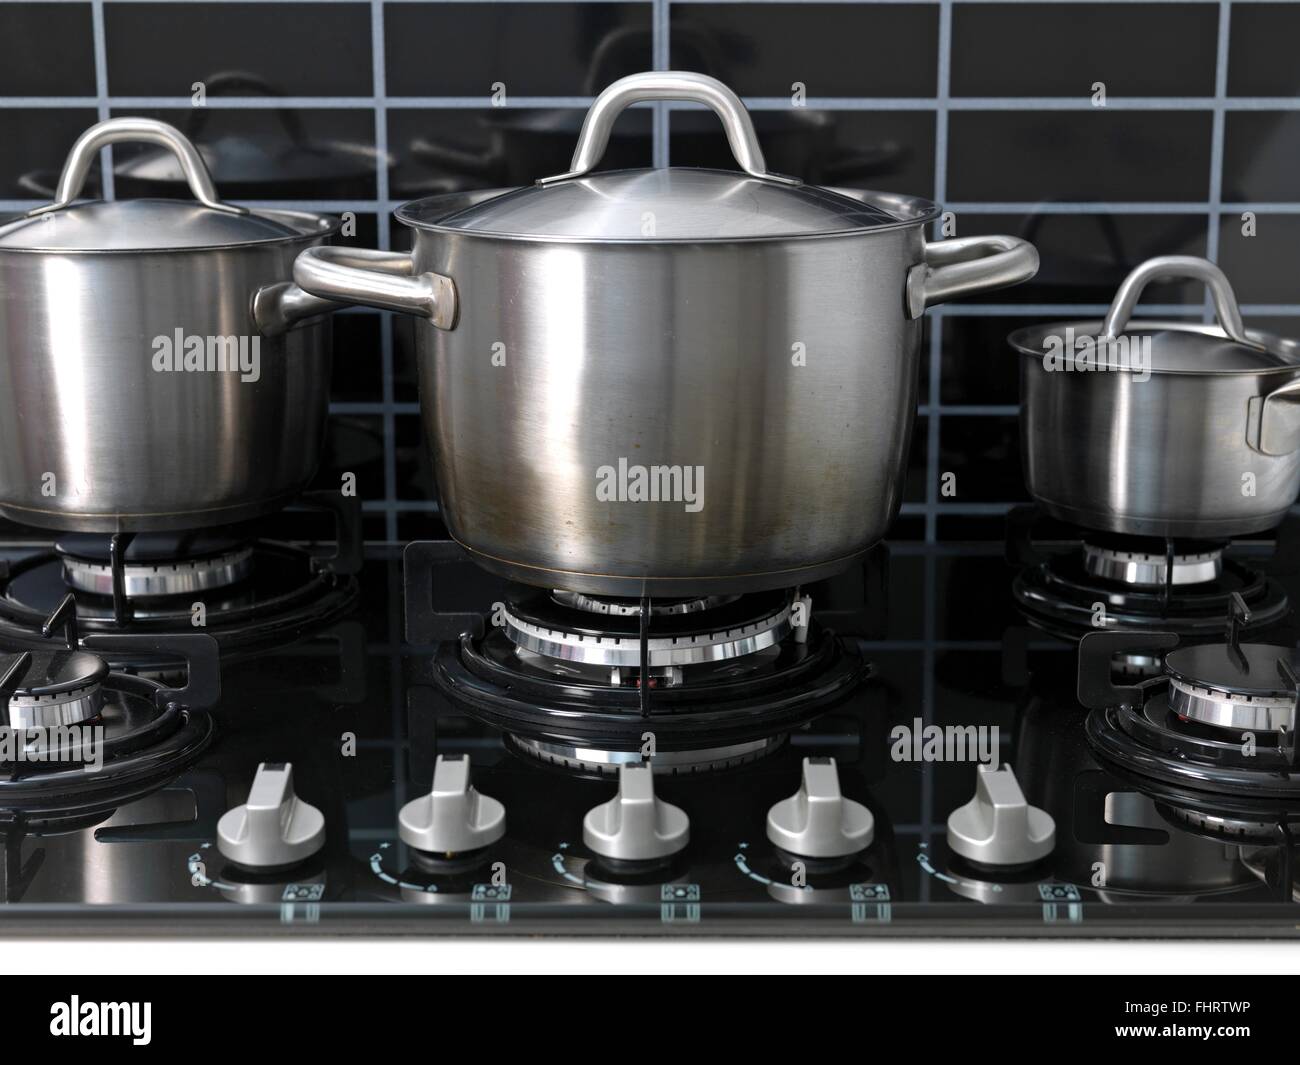 https://c8.alamy.com/comp/FHRTWP/a-stainless-steel-pot-on-a-cook-top-FHRTWP.jpg